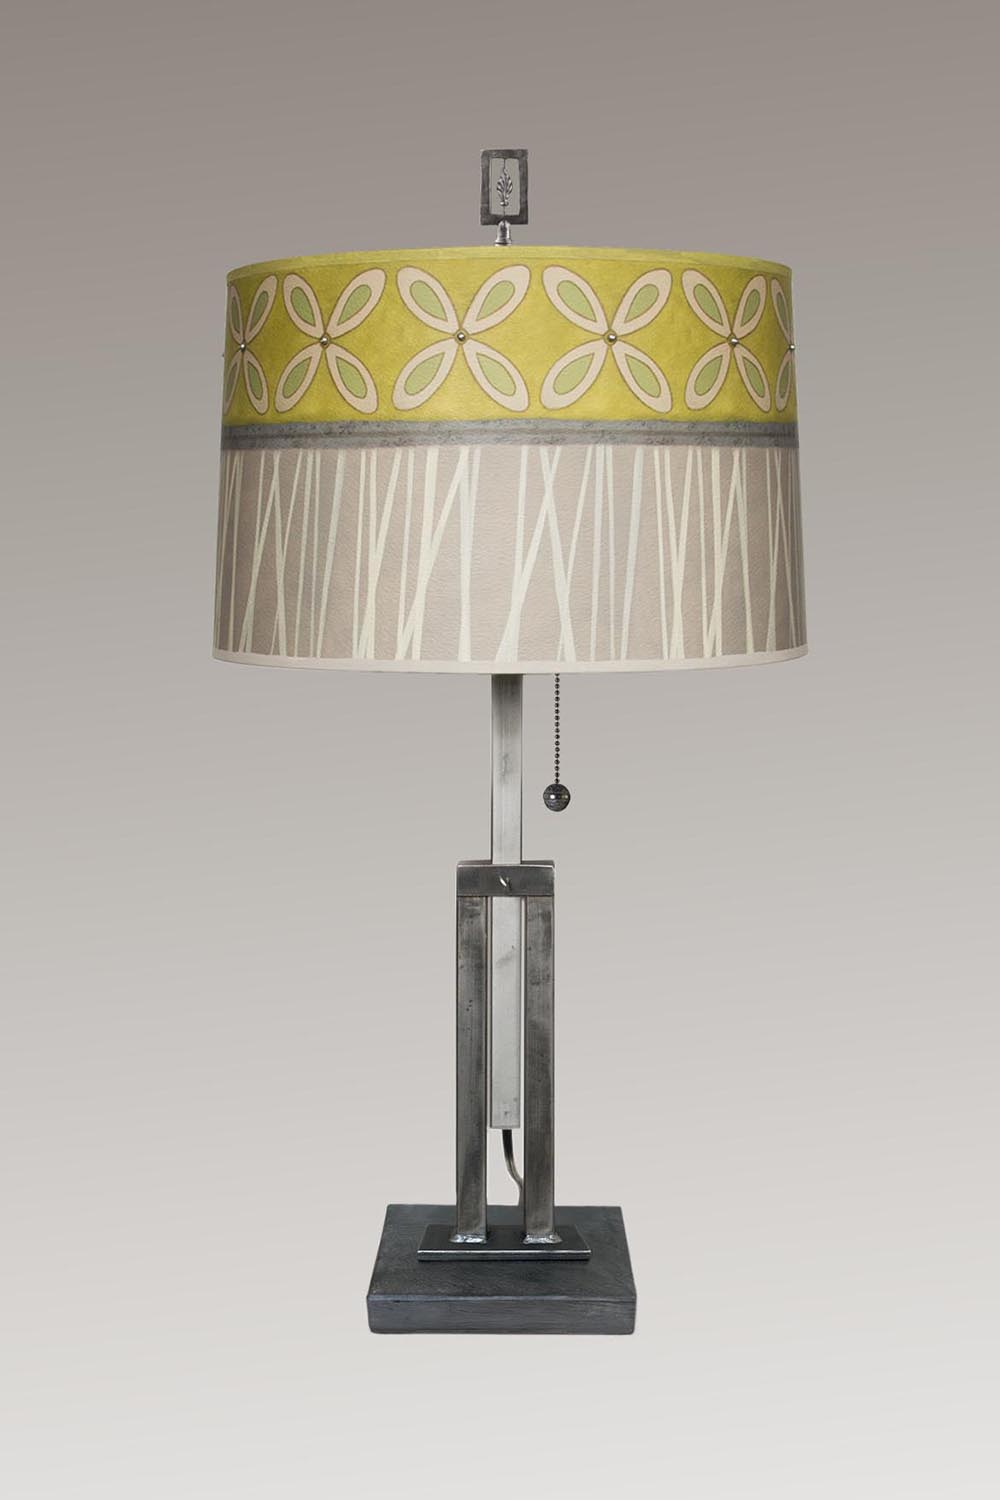 Janna Ugone &amp; Co Table Lamps Adjustable-Height Steel Table Lamp with Large Drum Shade in Kiwi